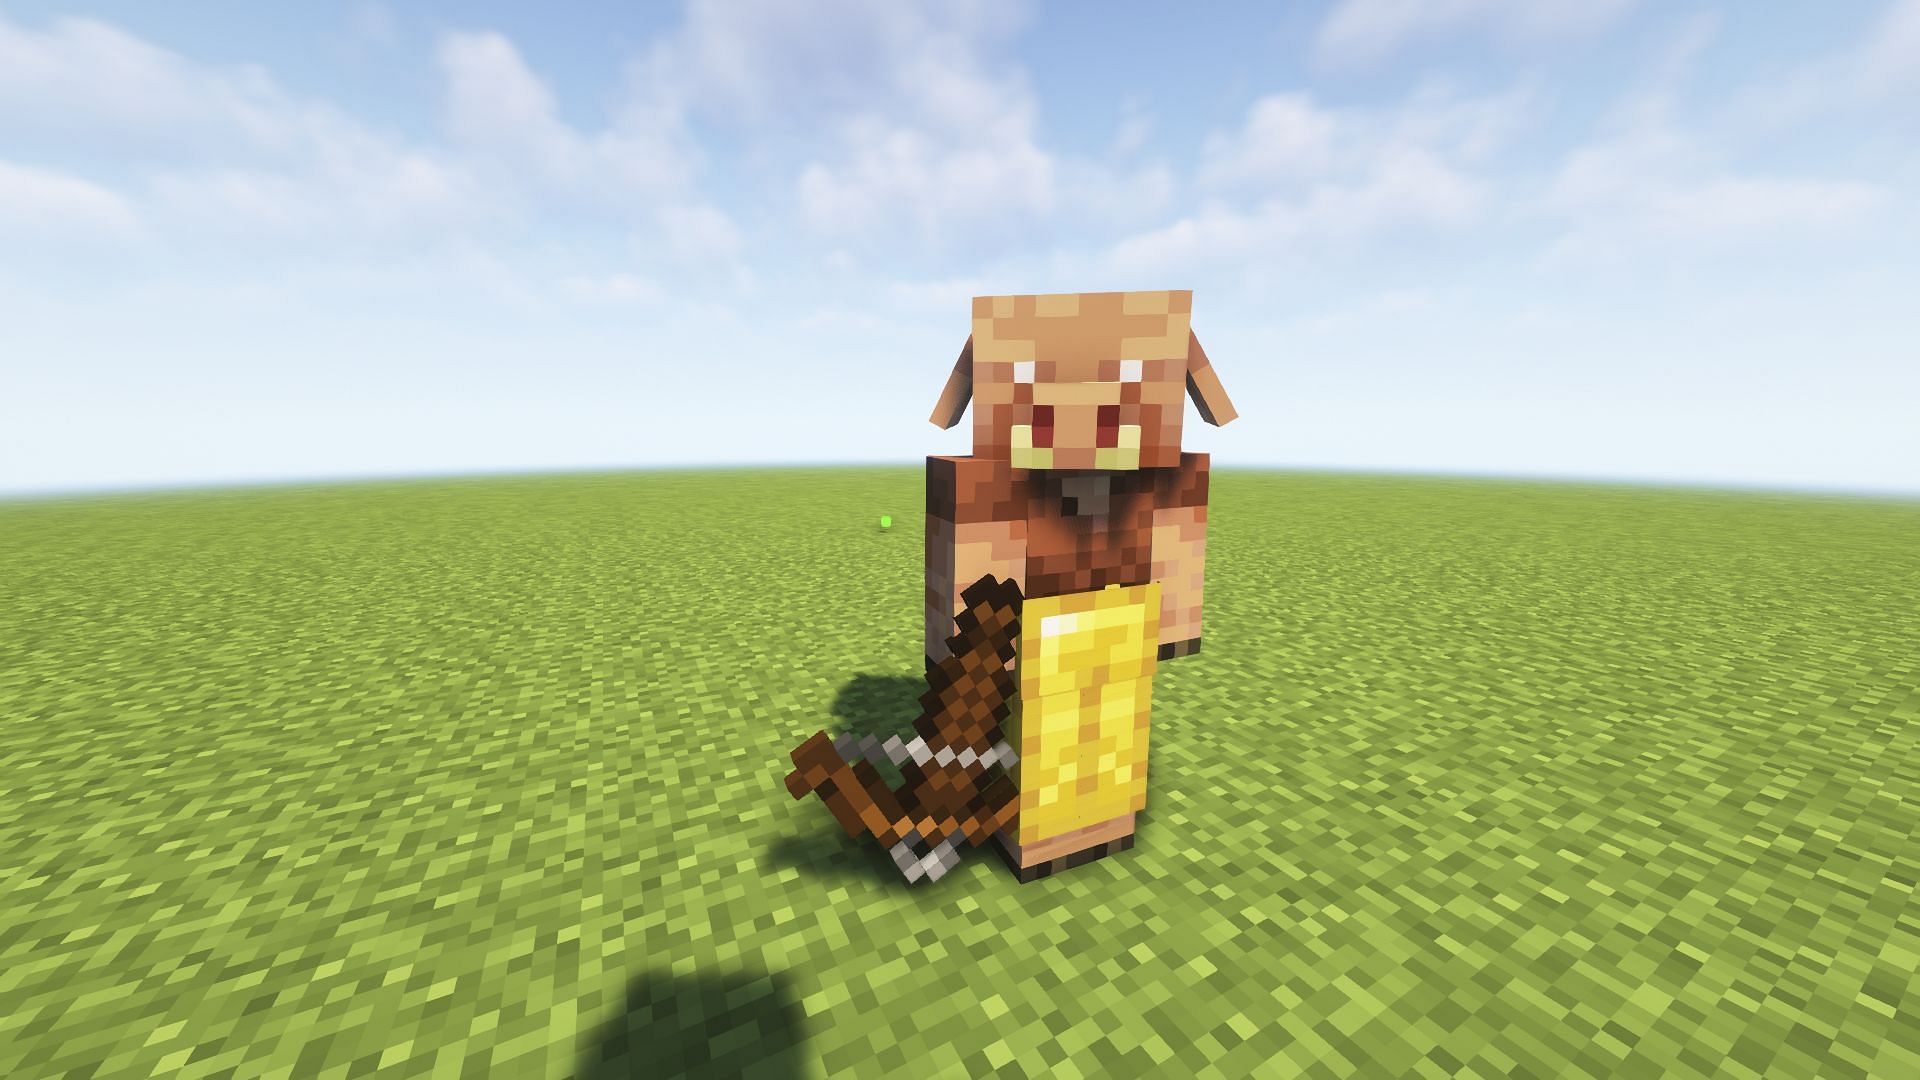 Piglins are neutral mobs that can attack players in certain conditions in Minecraft (Image via Mojang)